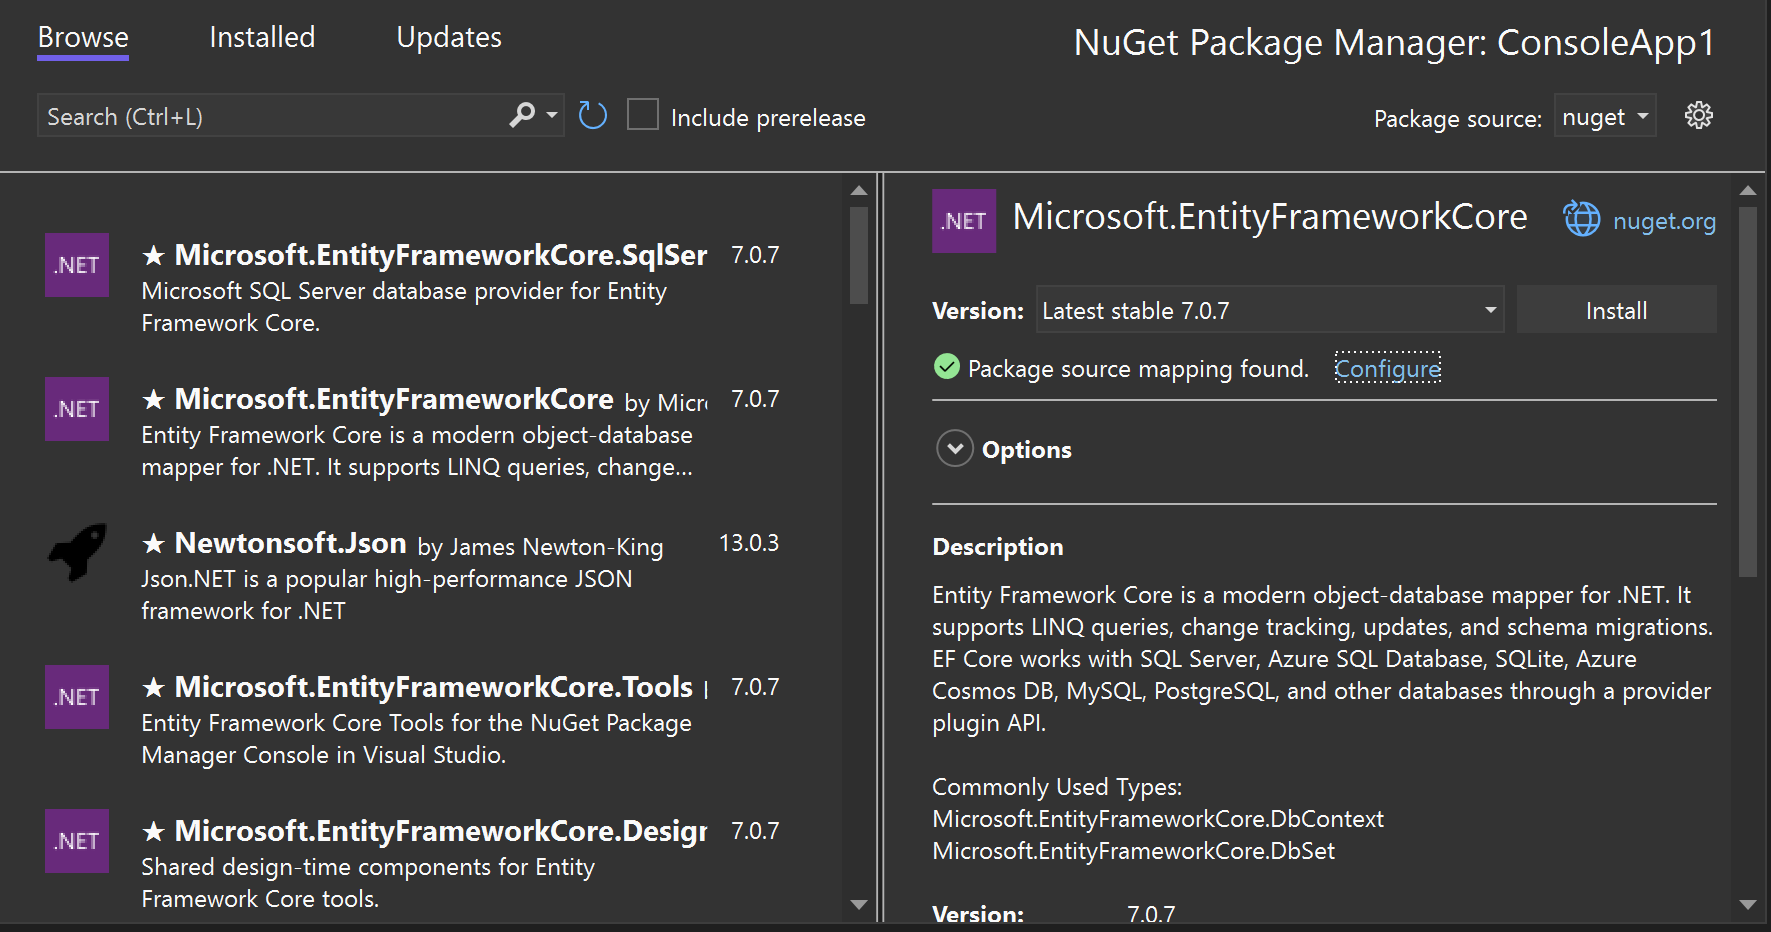 The NuGet Package Manager window in Visual Studio showing a selected package with the "Package source mapping found" status with a Configure button.